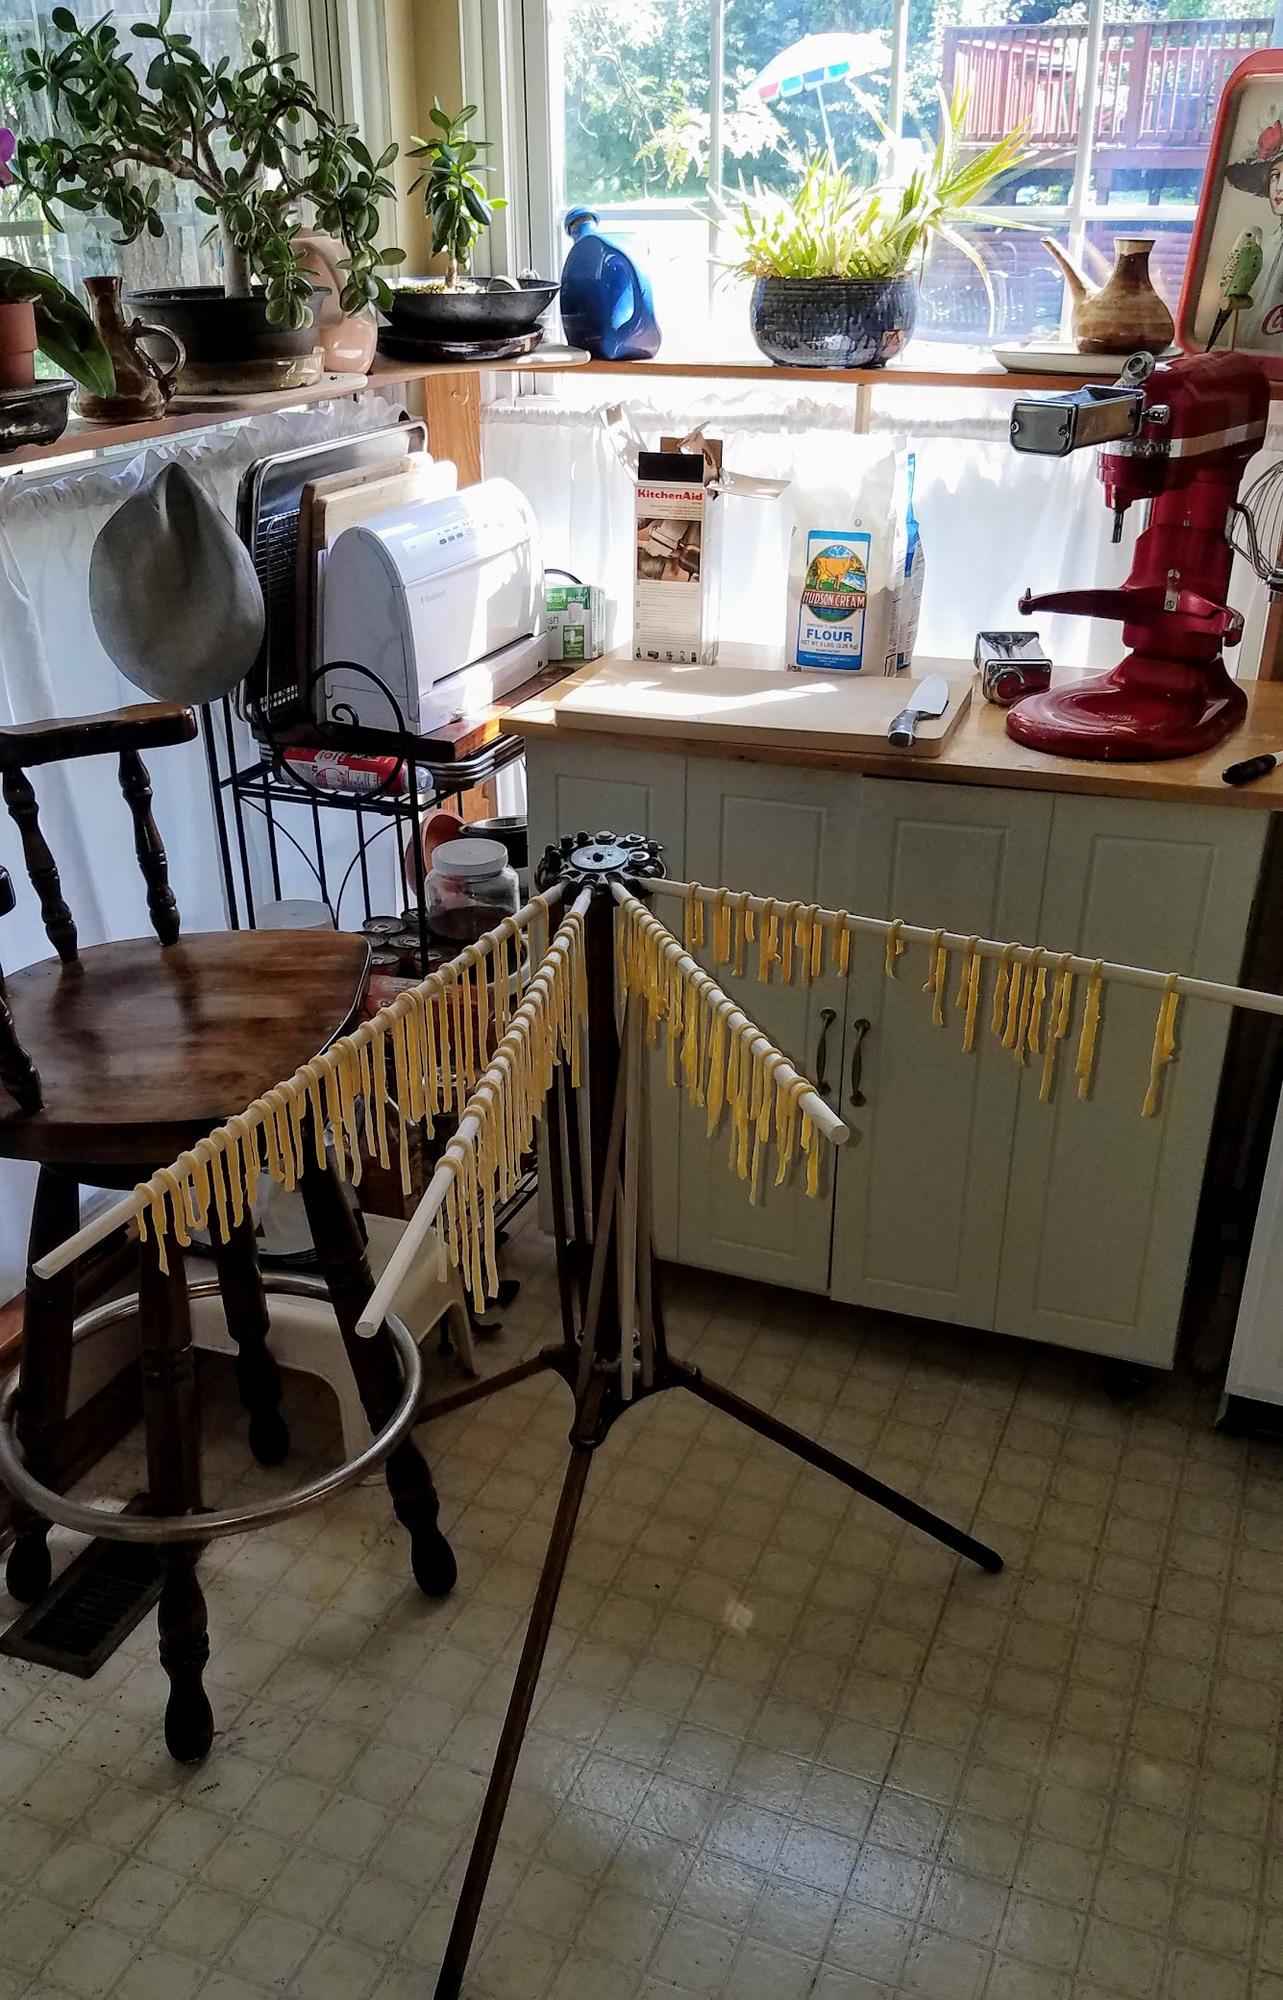 Pasta drying rack - Kitchen Consumer - eGullet Forums